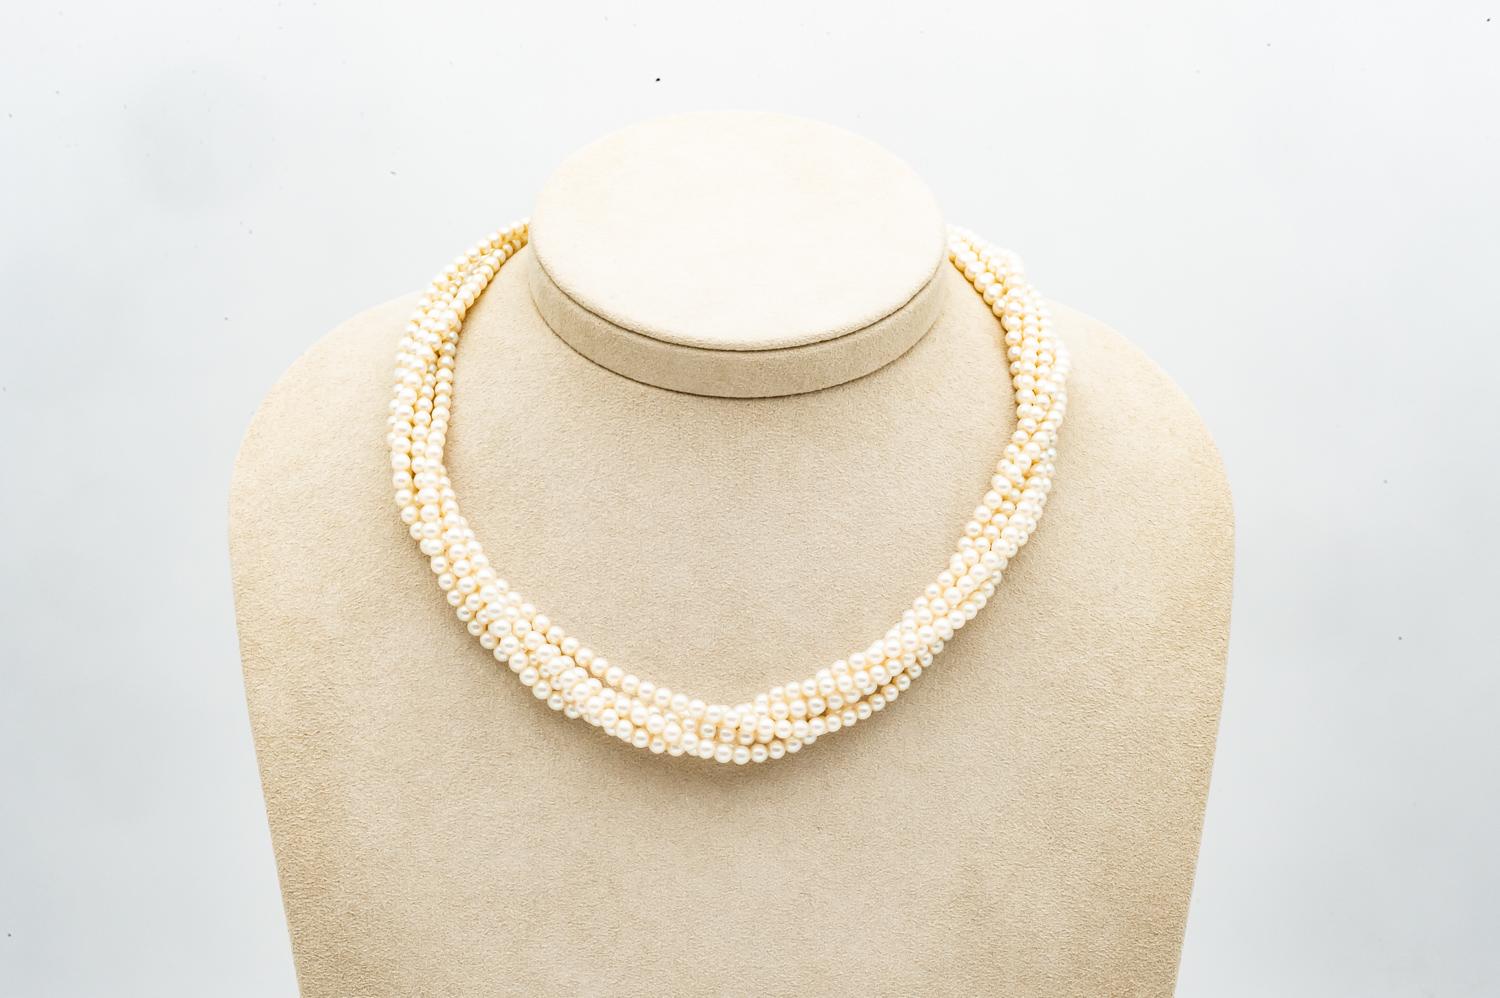 Discover this elegant necklace featuring 6 strands of twisted cultured pearls, enhanced by an 18k yellow and white gold clasp. This necklace is a true work of art, combining the classic elegance of cultured pearls with a sophisticated modern